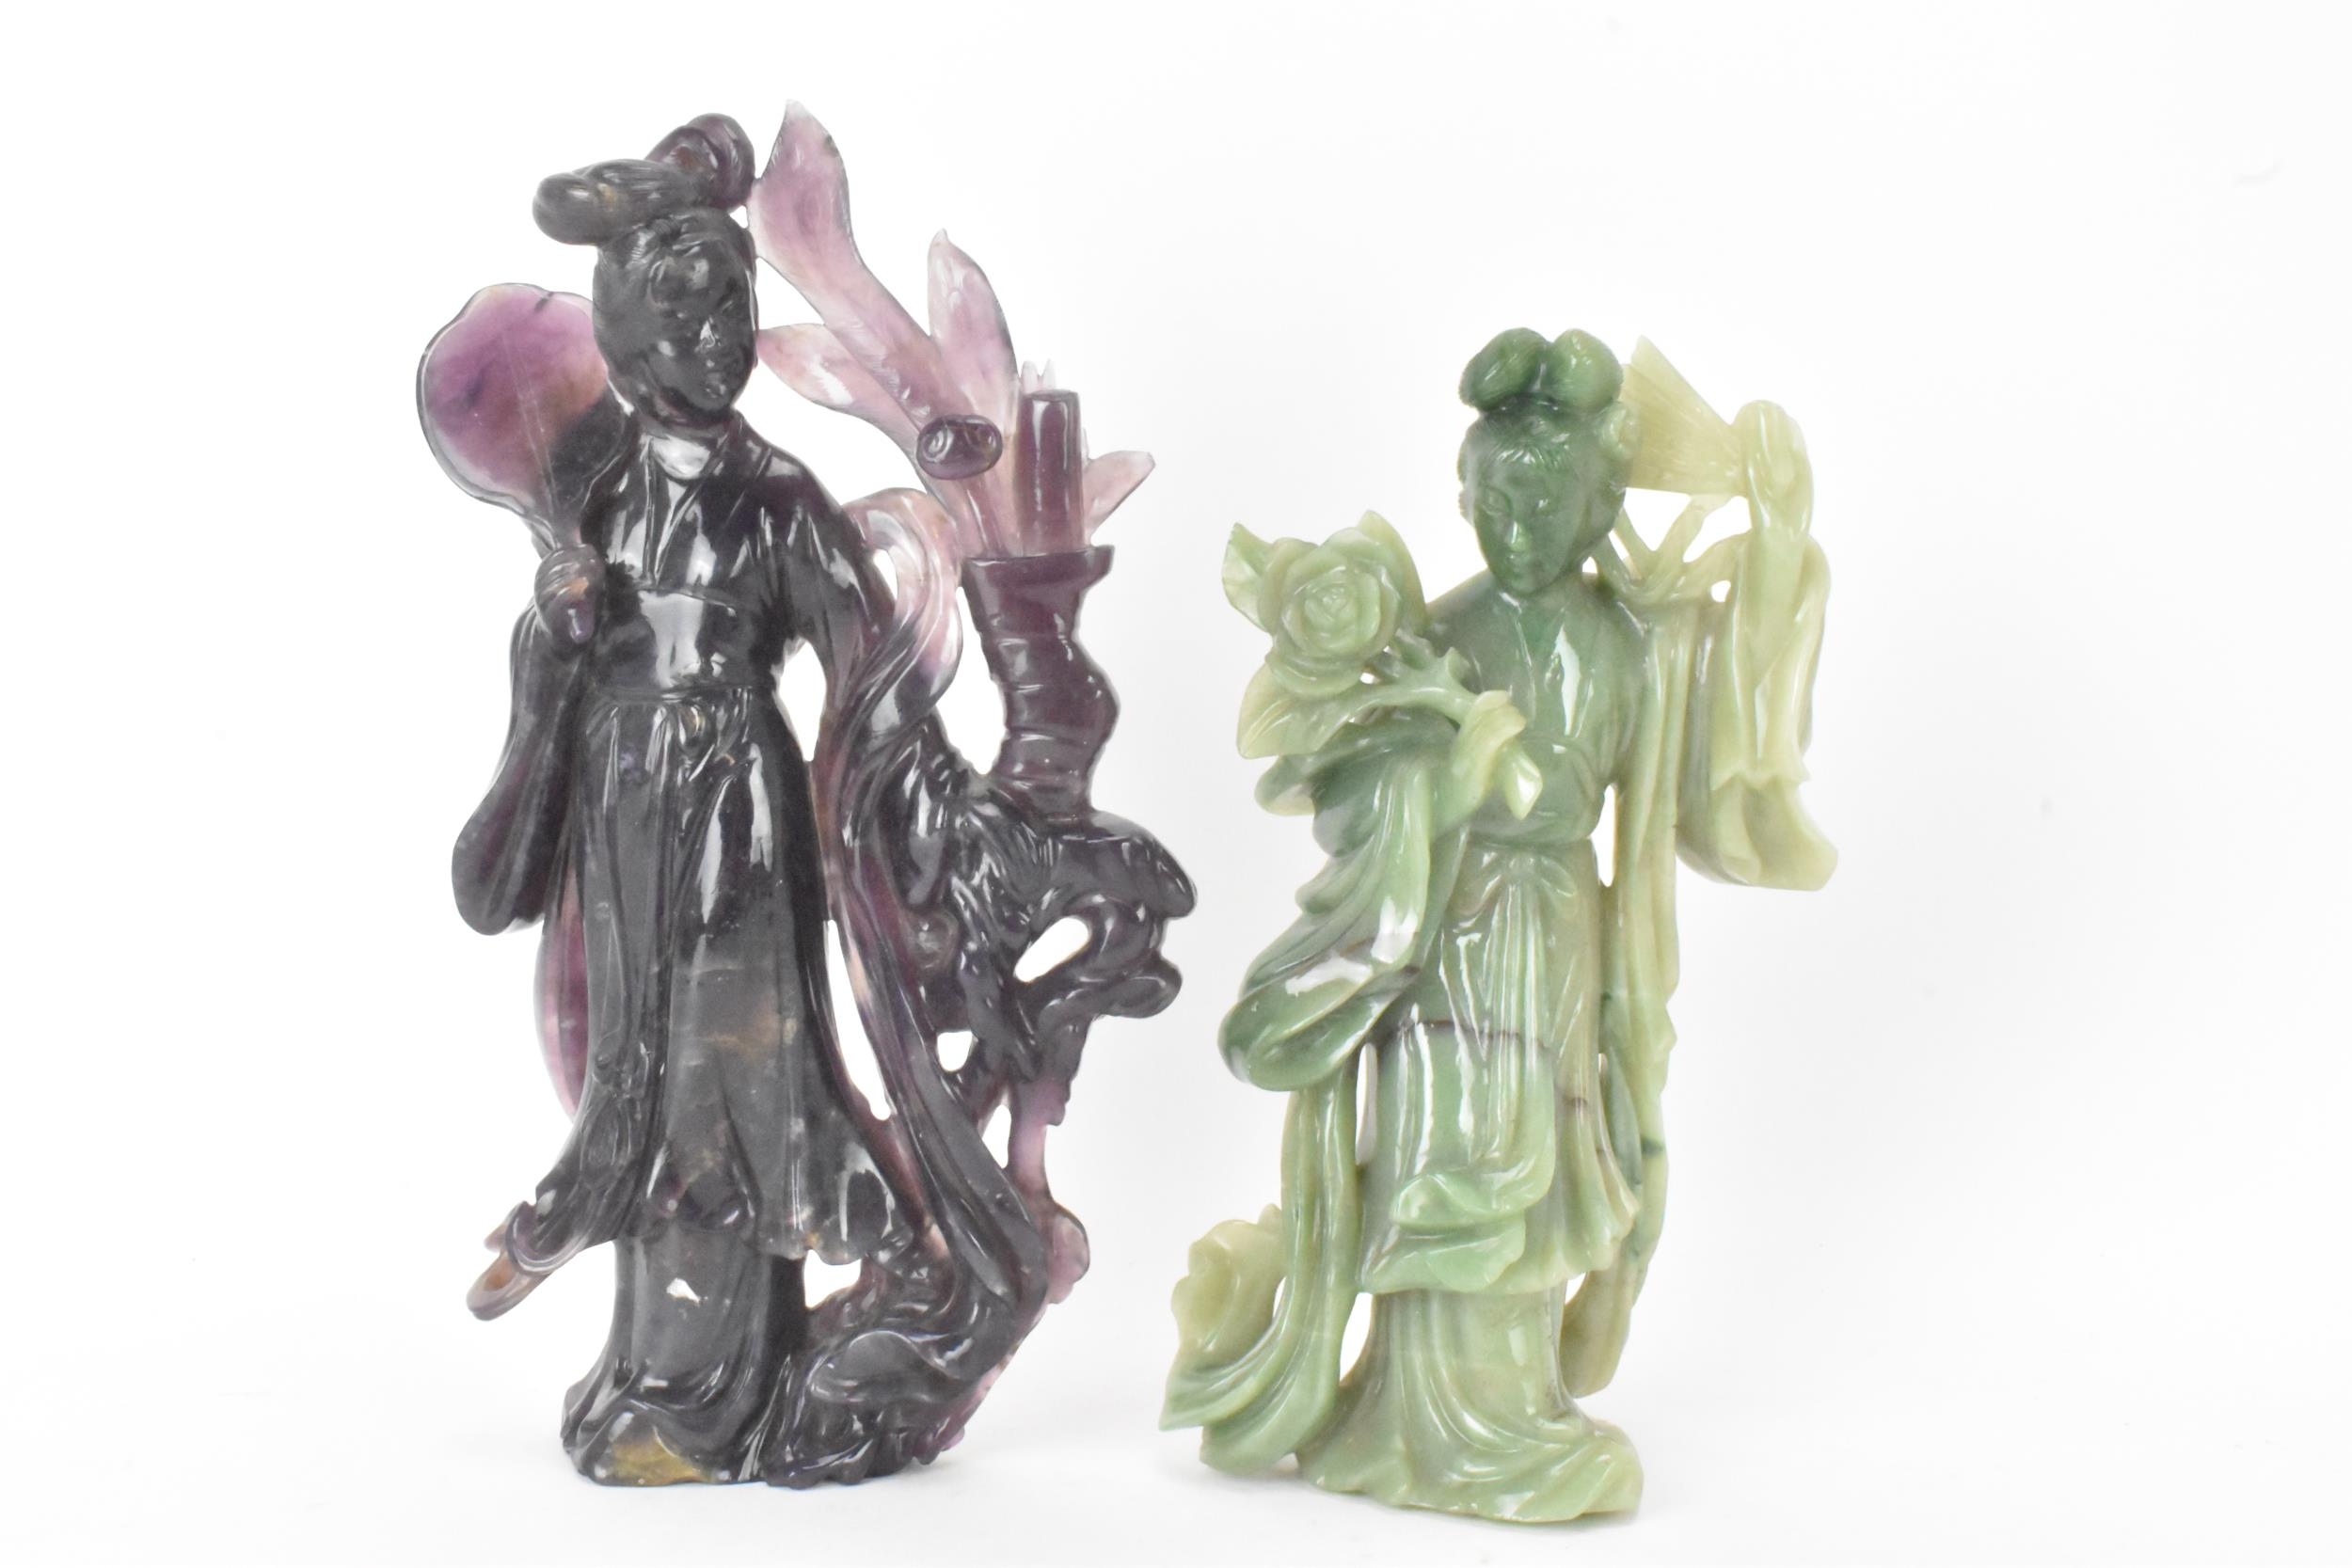 Two Chinese 20th century jadeite carved figures, the green example modeled holding a fan and flowers